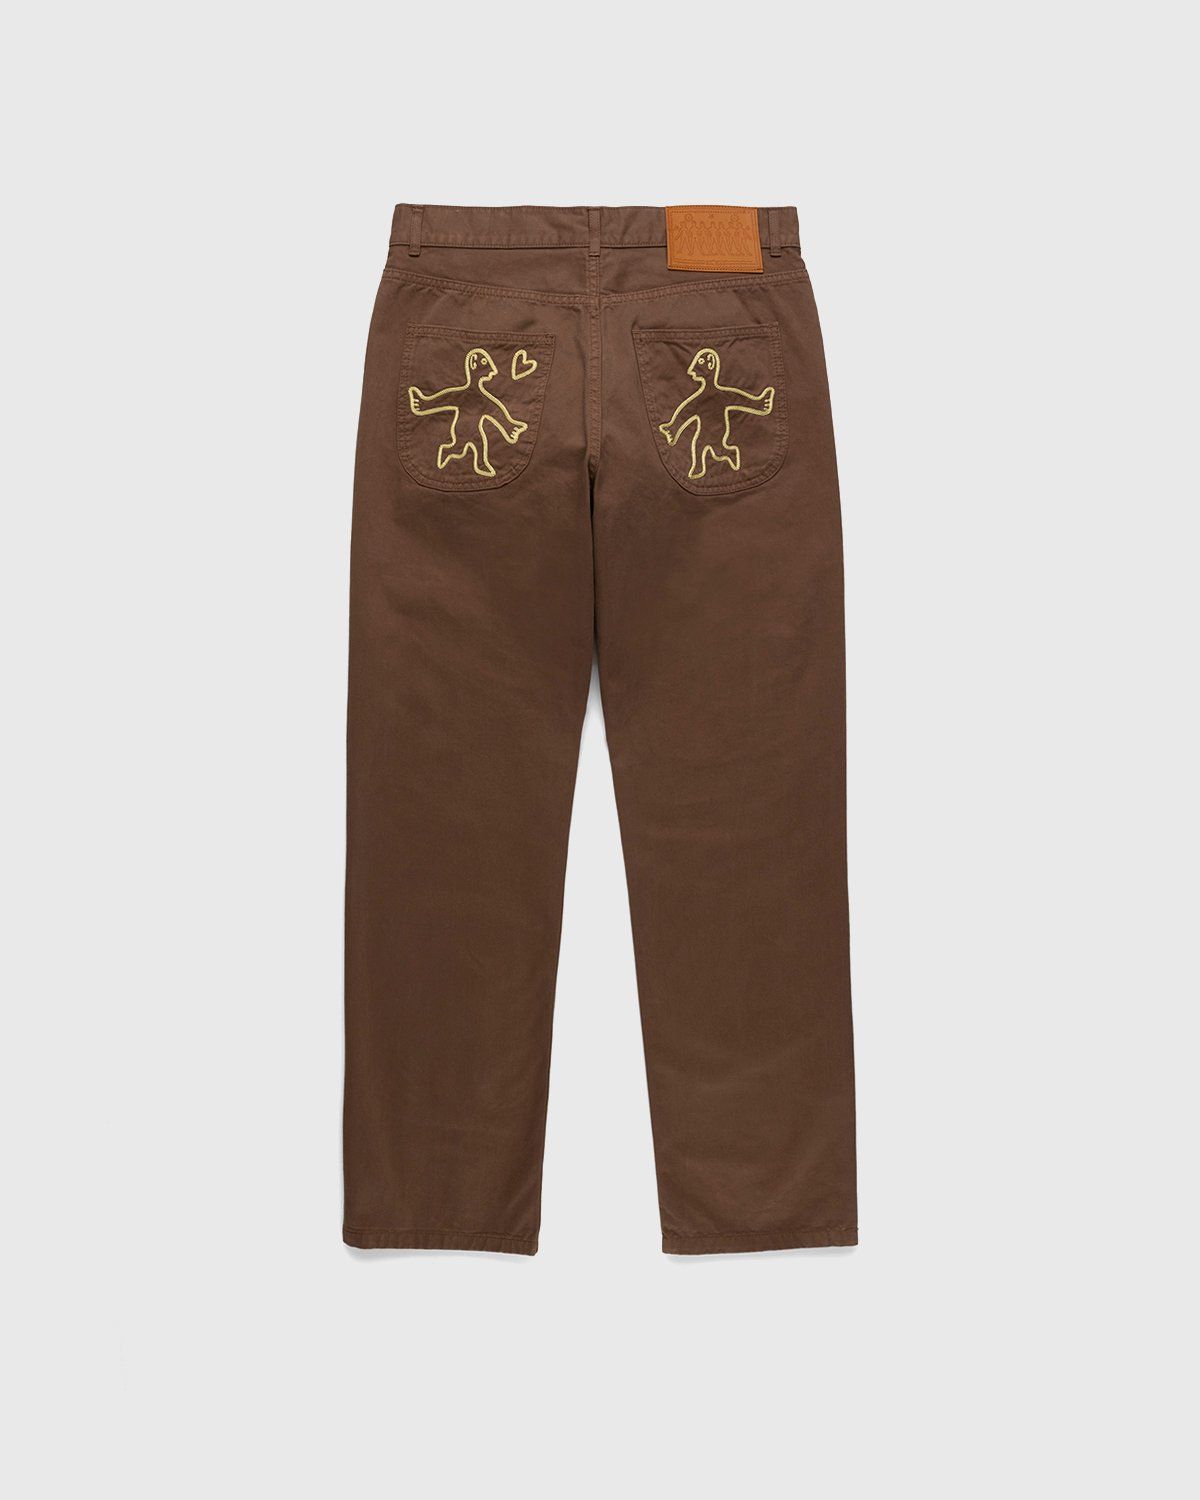 Carne Bollente – The Back Bump Trouser Brown - Pants - Brown - Image 2